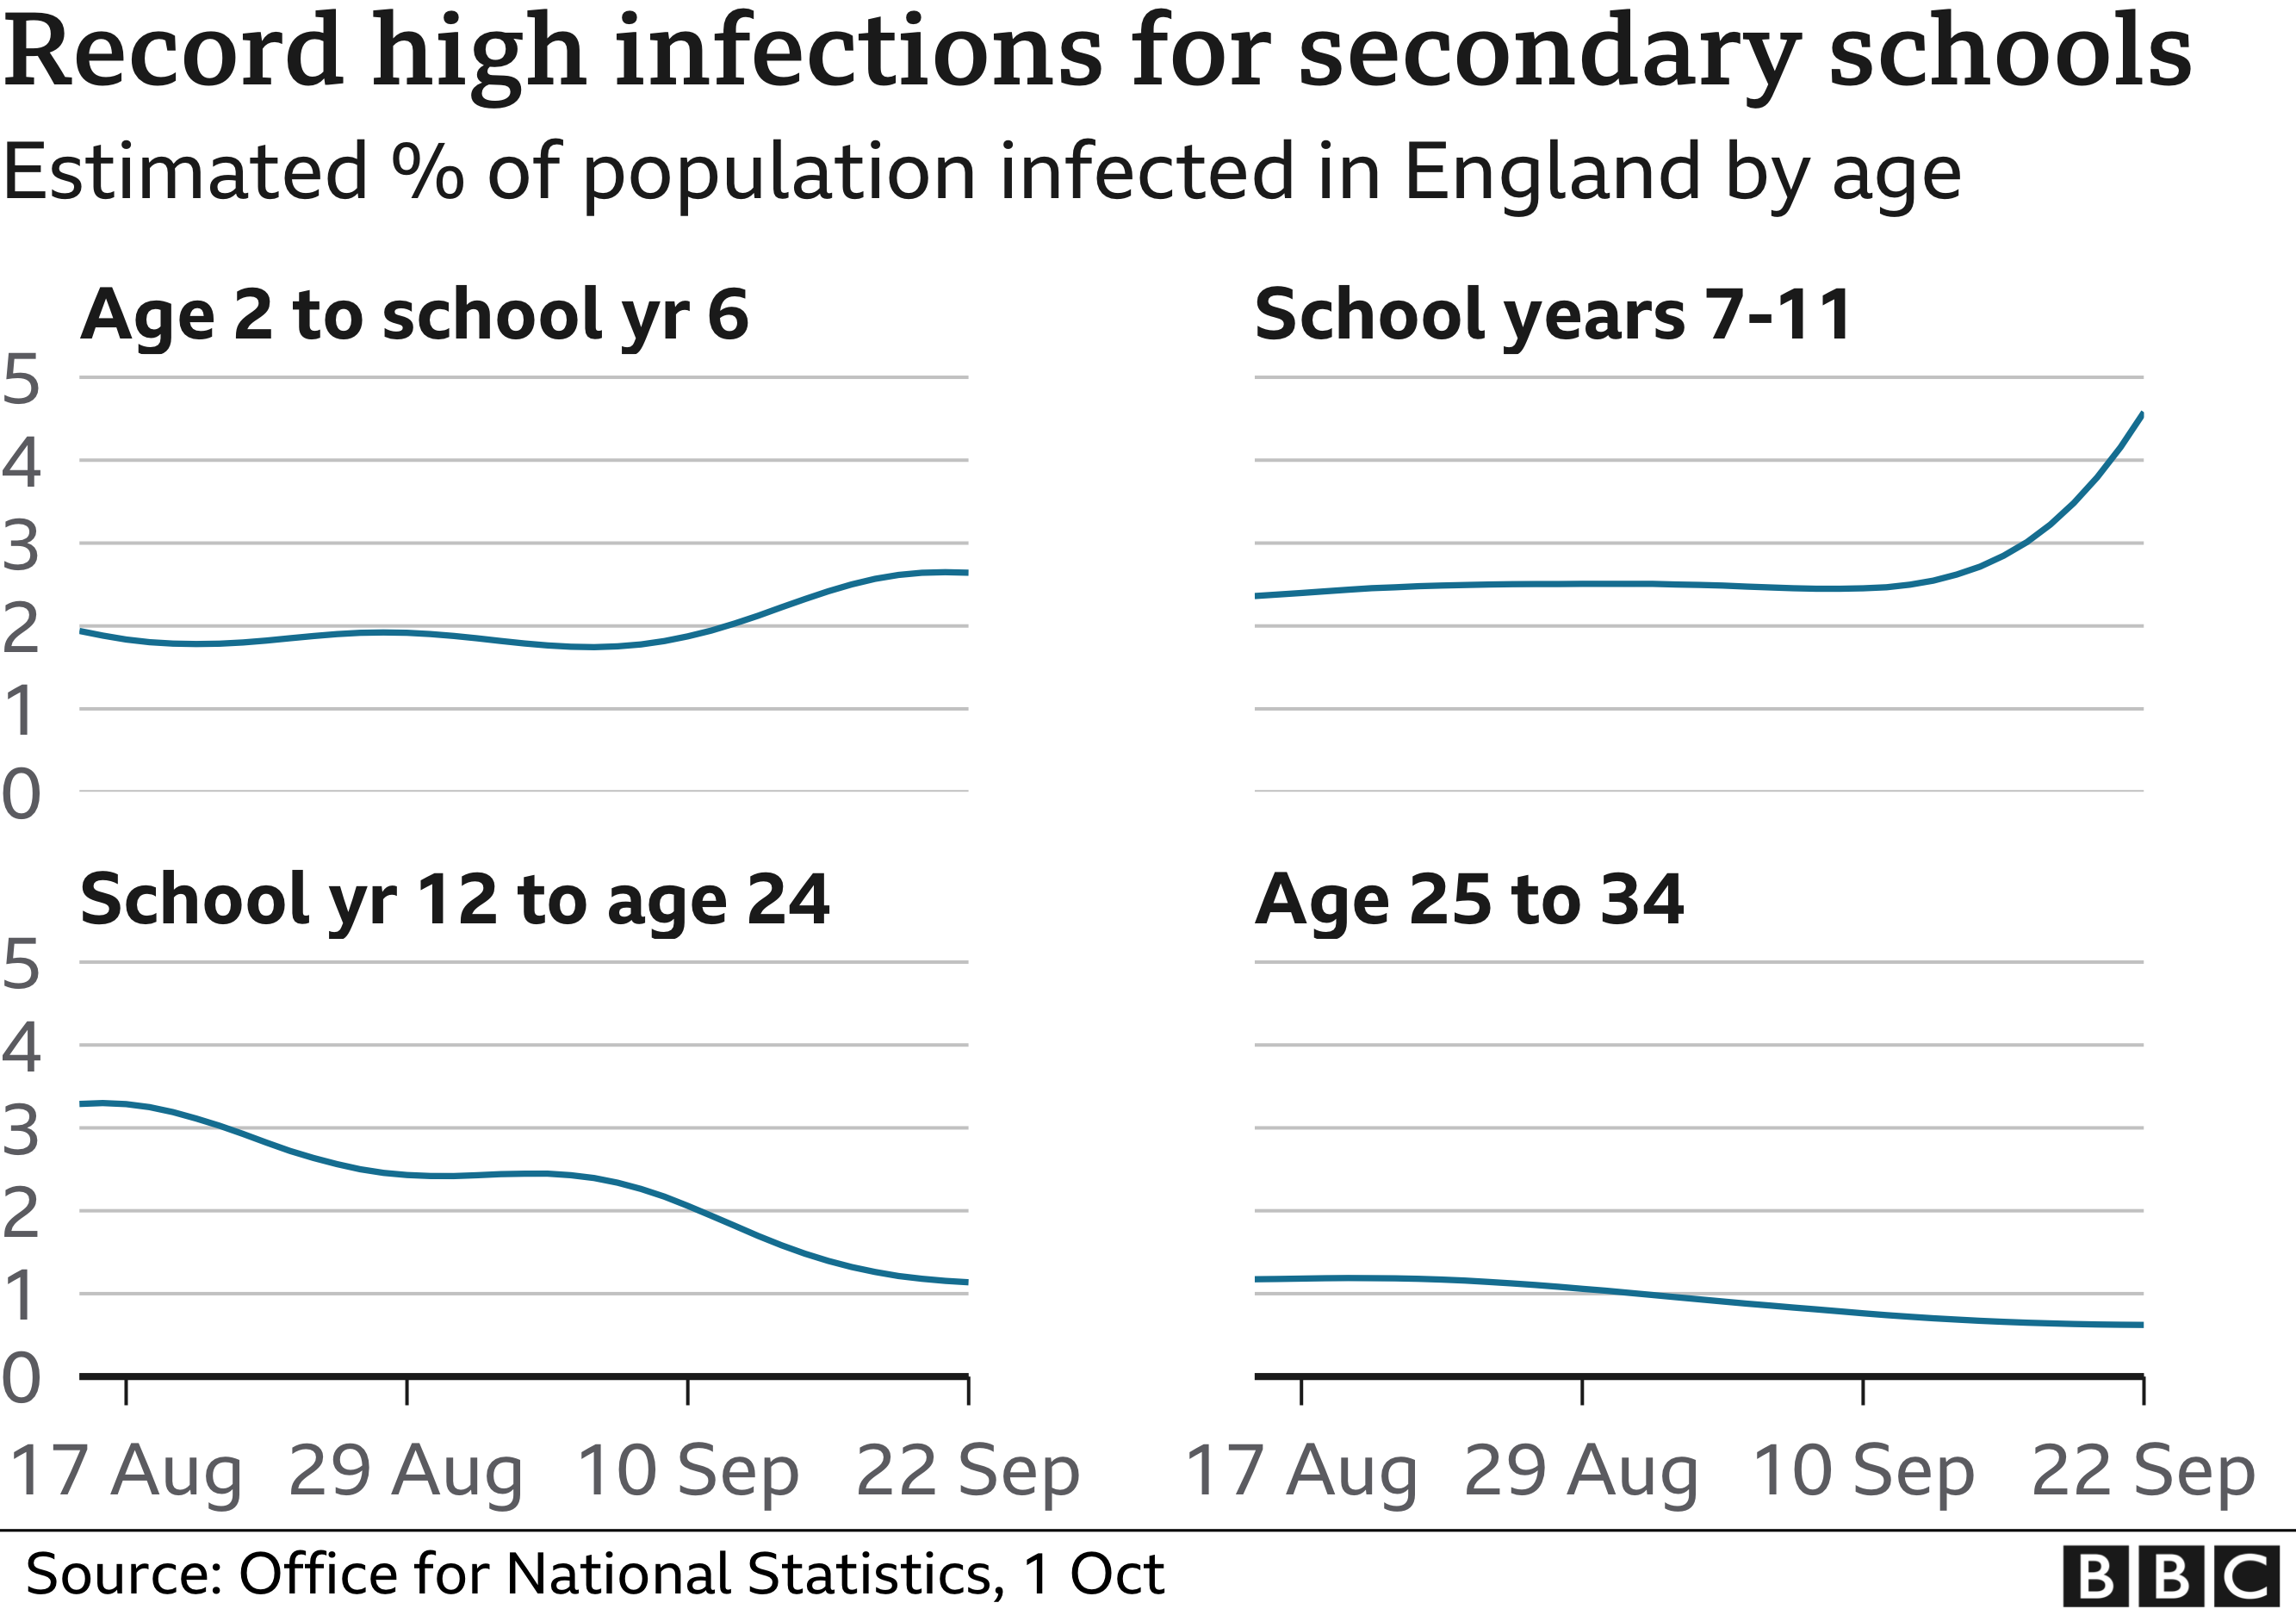 Record high infections in secondary school age children